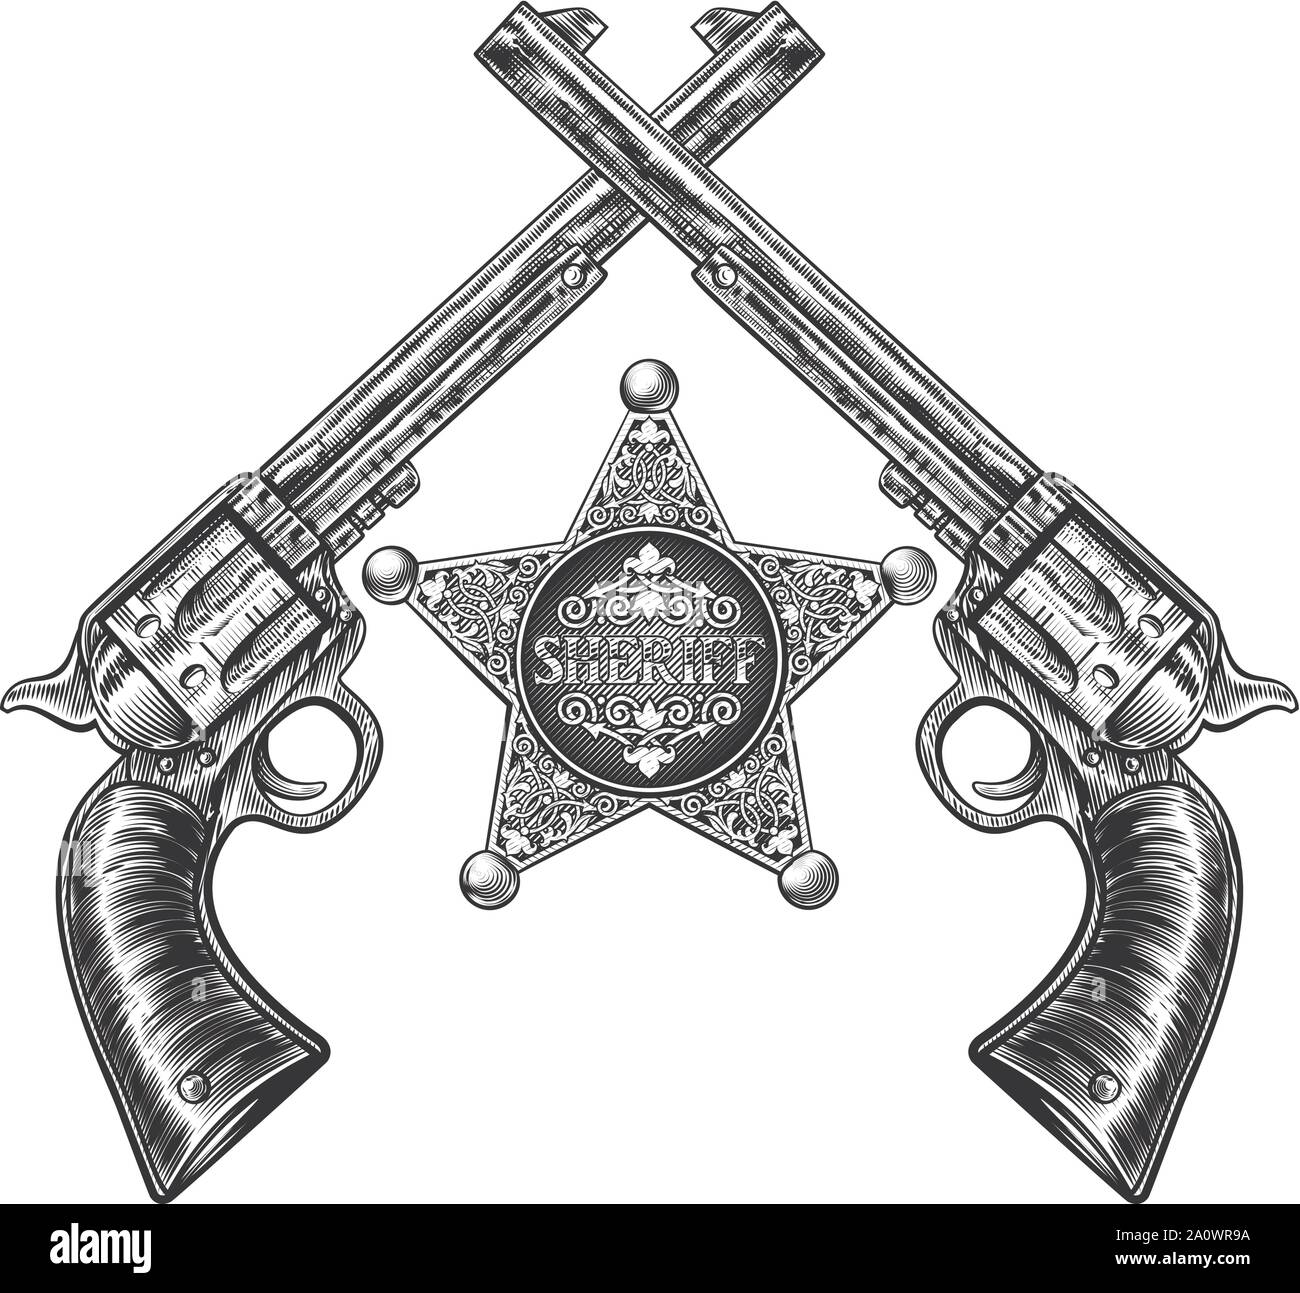 Crossed Pistols and Sheriff Star Badge Stock Vector